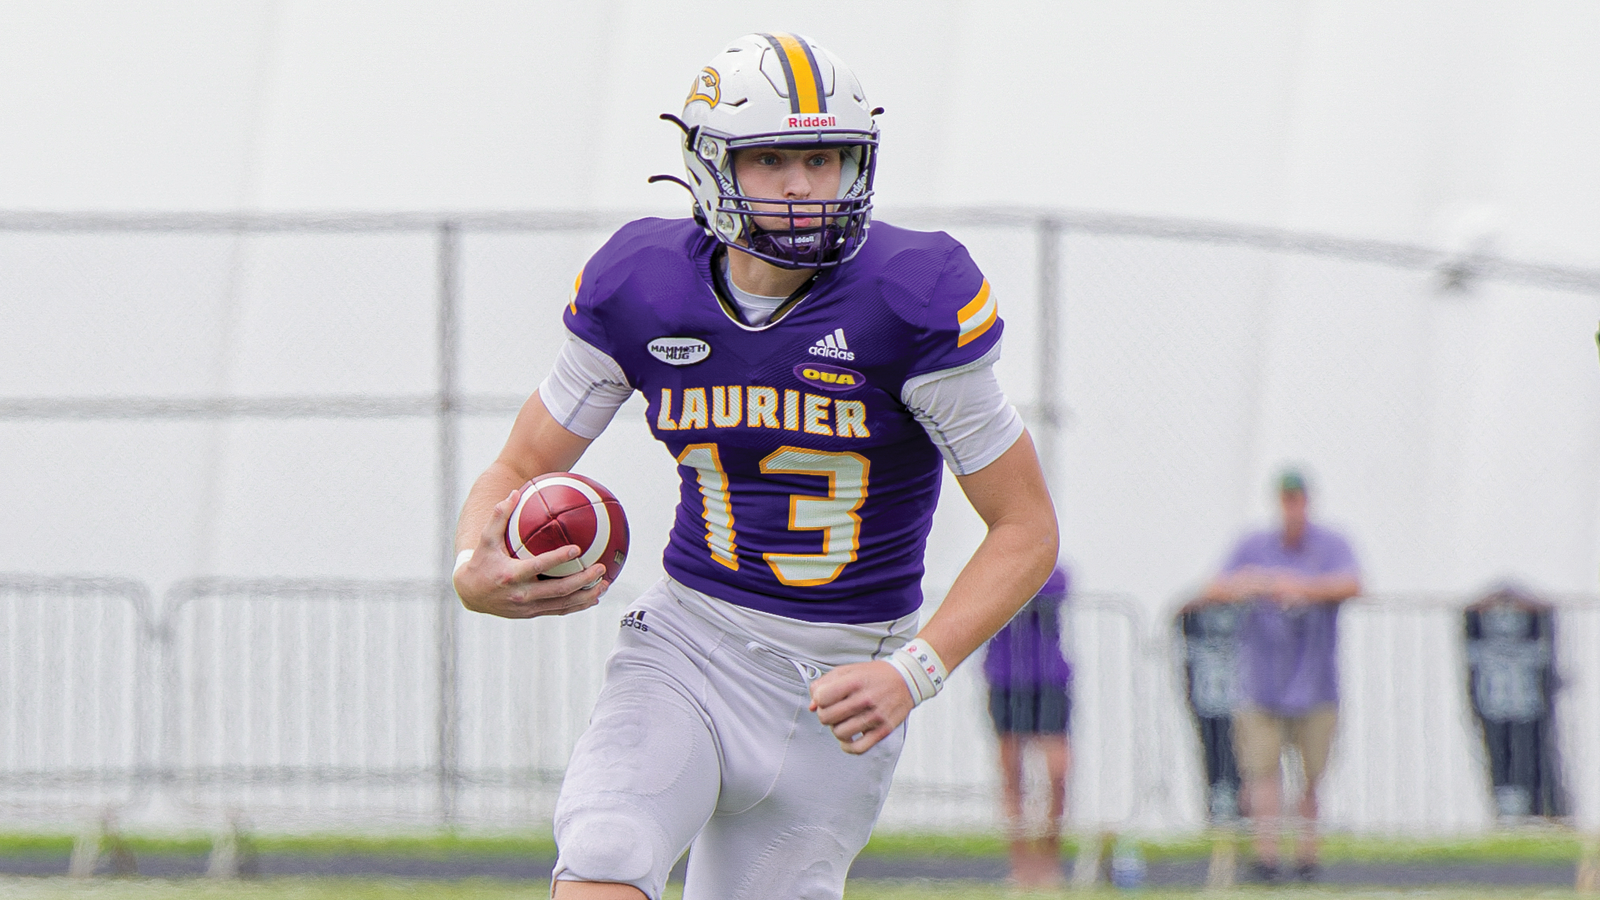 Action photo of Laurier quarterback Taylor Elgersma running with the ball